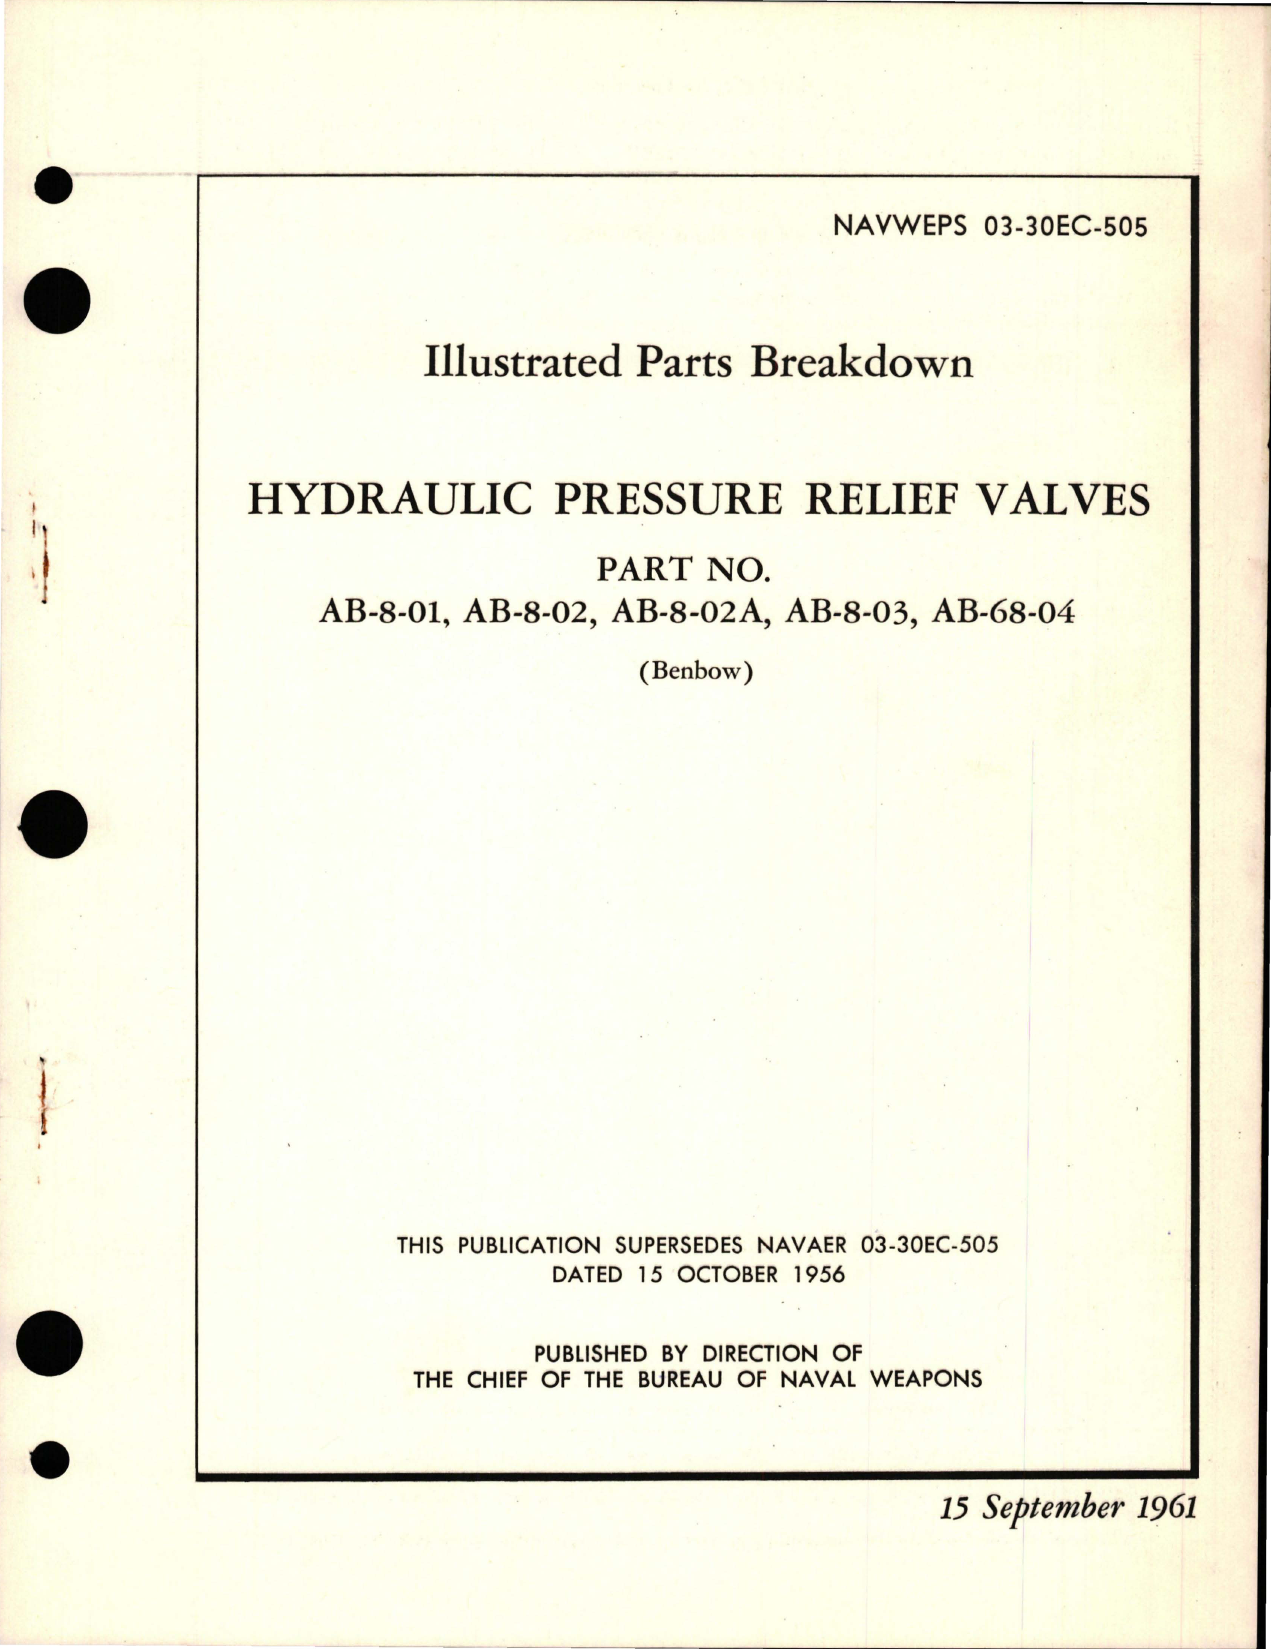 Sample page 1 from AirCorps Library document: Illustrated Parts Breakdown for Hydraulic Pressure Relief Valves - Parts AB-8-01, AB-8-02, AB-8-02A, AB-8-03, and AB-68-04